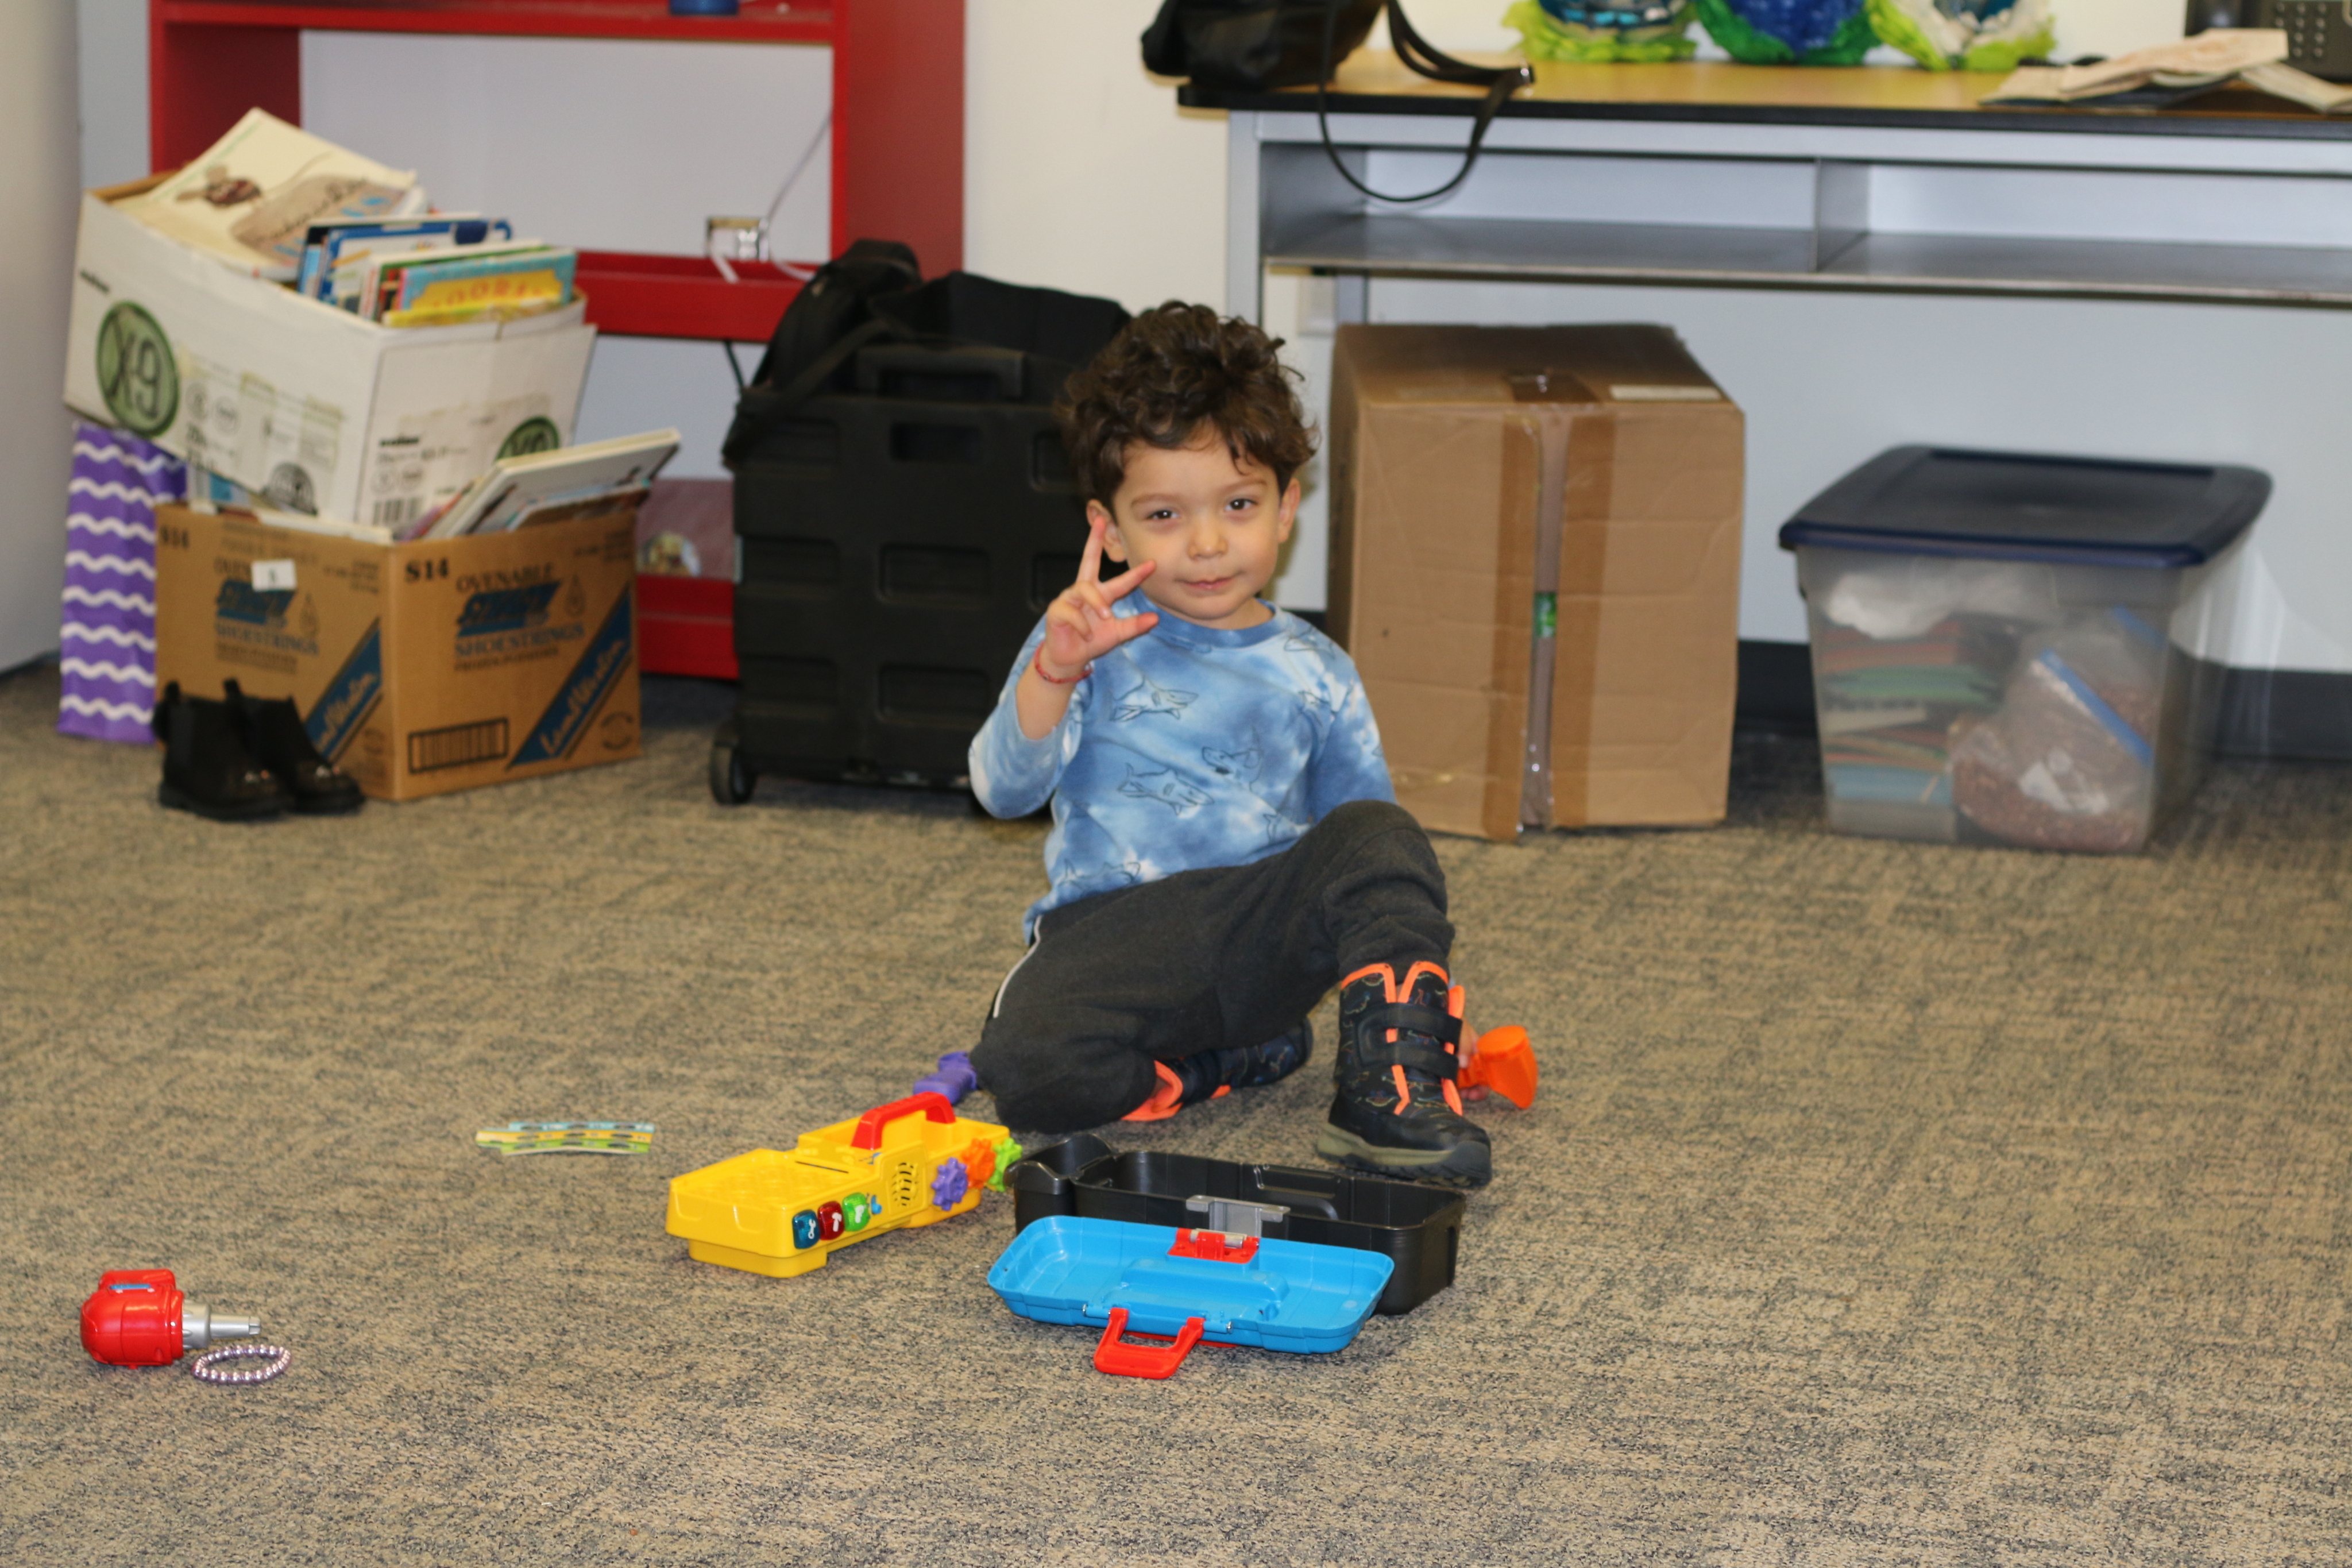 Free childcare helped parents concentrate on the tasks at hand each week.